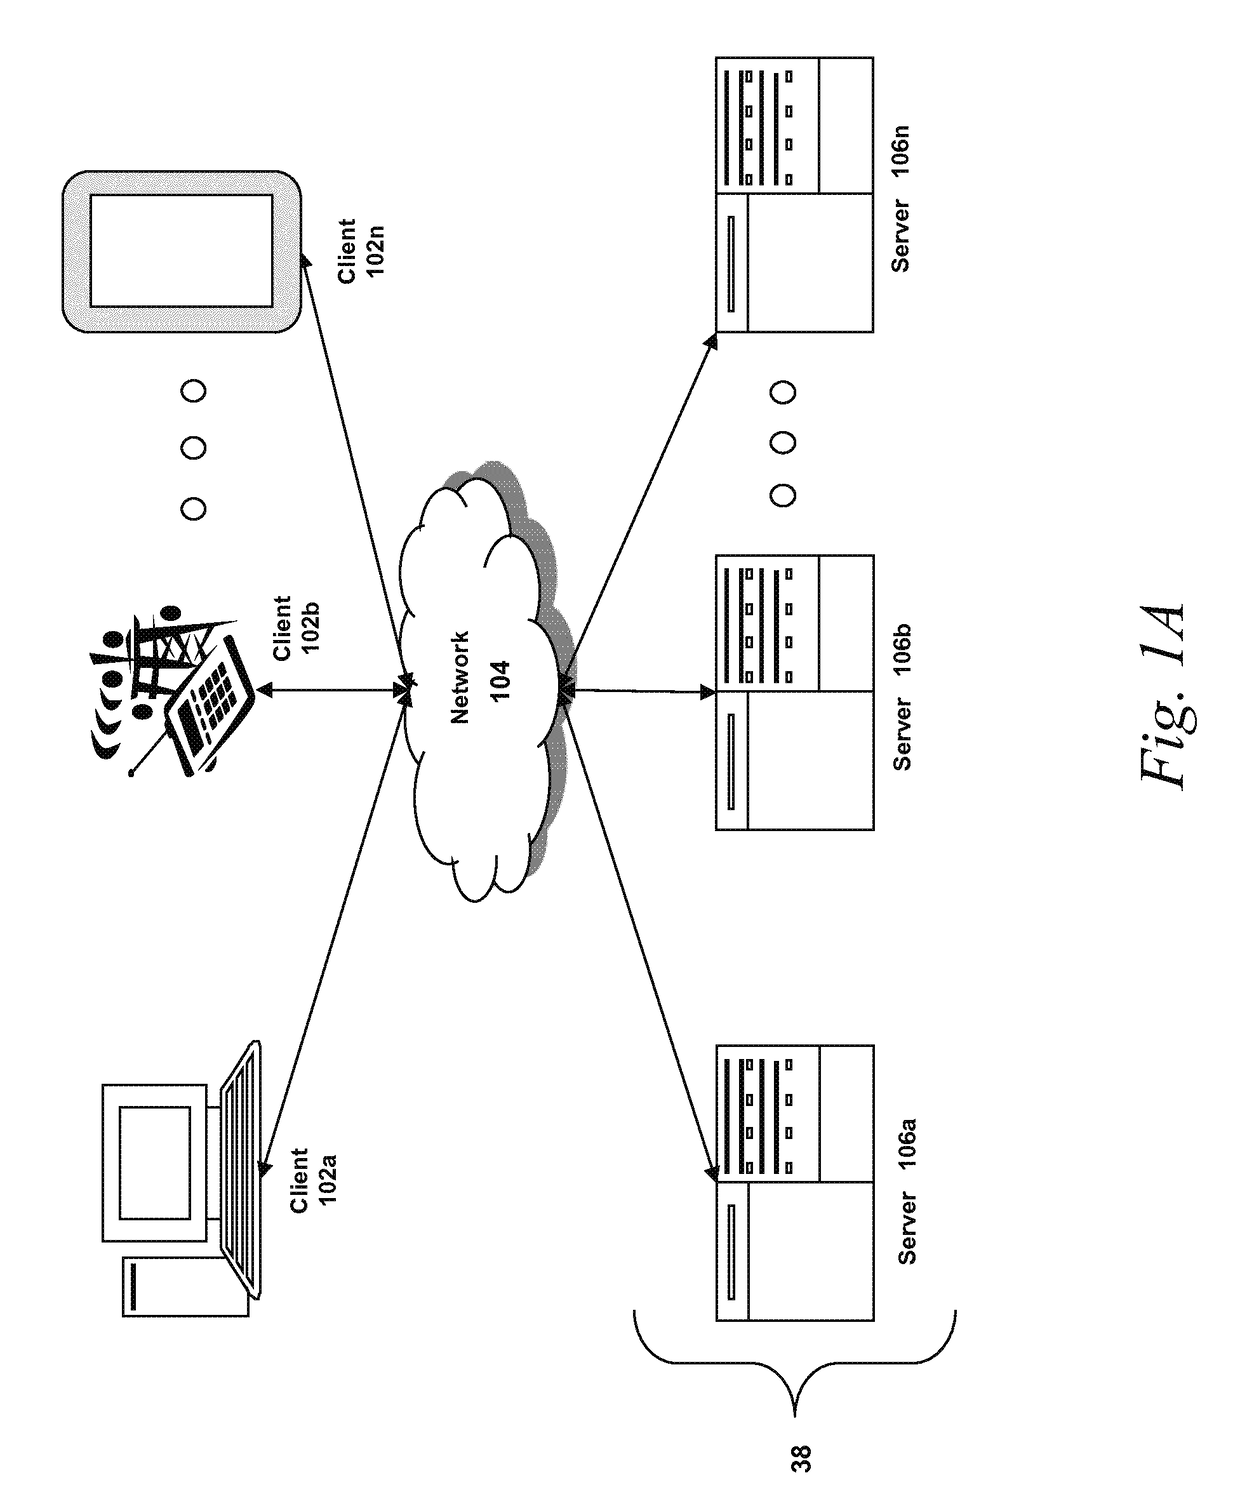 Systems and methods for performing a simulated phishing attack